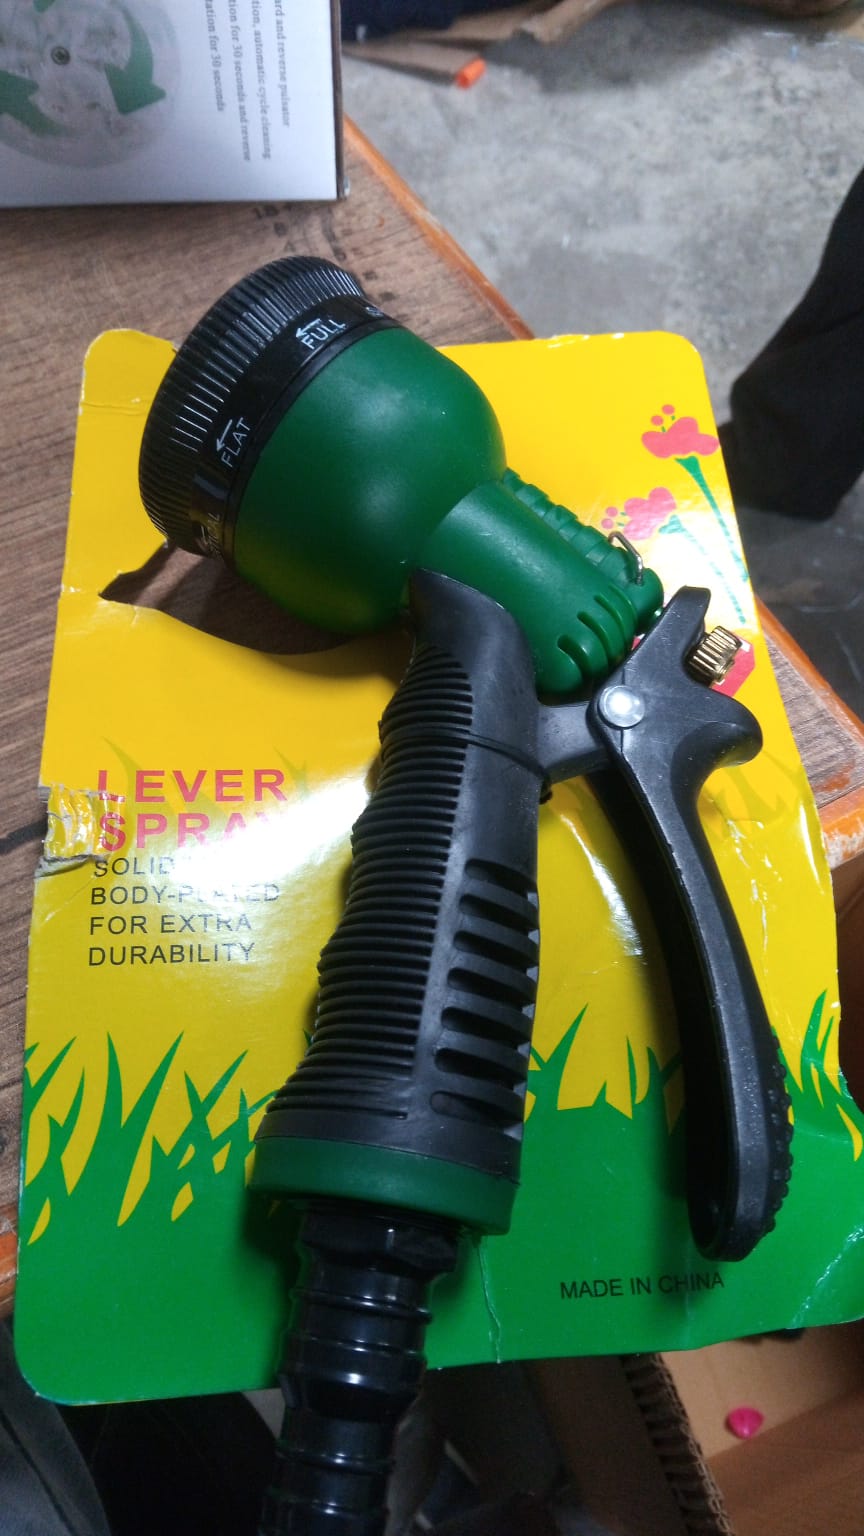 7515 Adjustable 8 Pattern Water Spray Gun Trigger High Pressure For vehicle & cleaning Garden Lawn, Grass rinse, flat, soak & washing for Car Bike Plants Pressure Washer water Nozzle